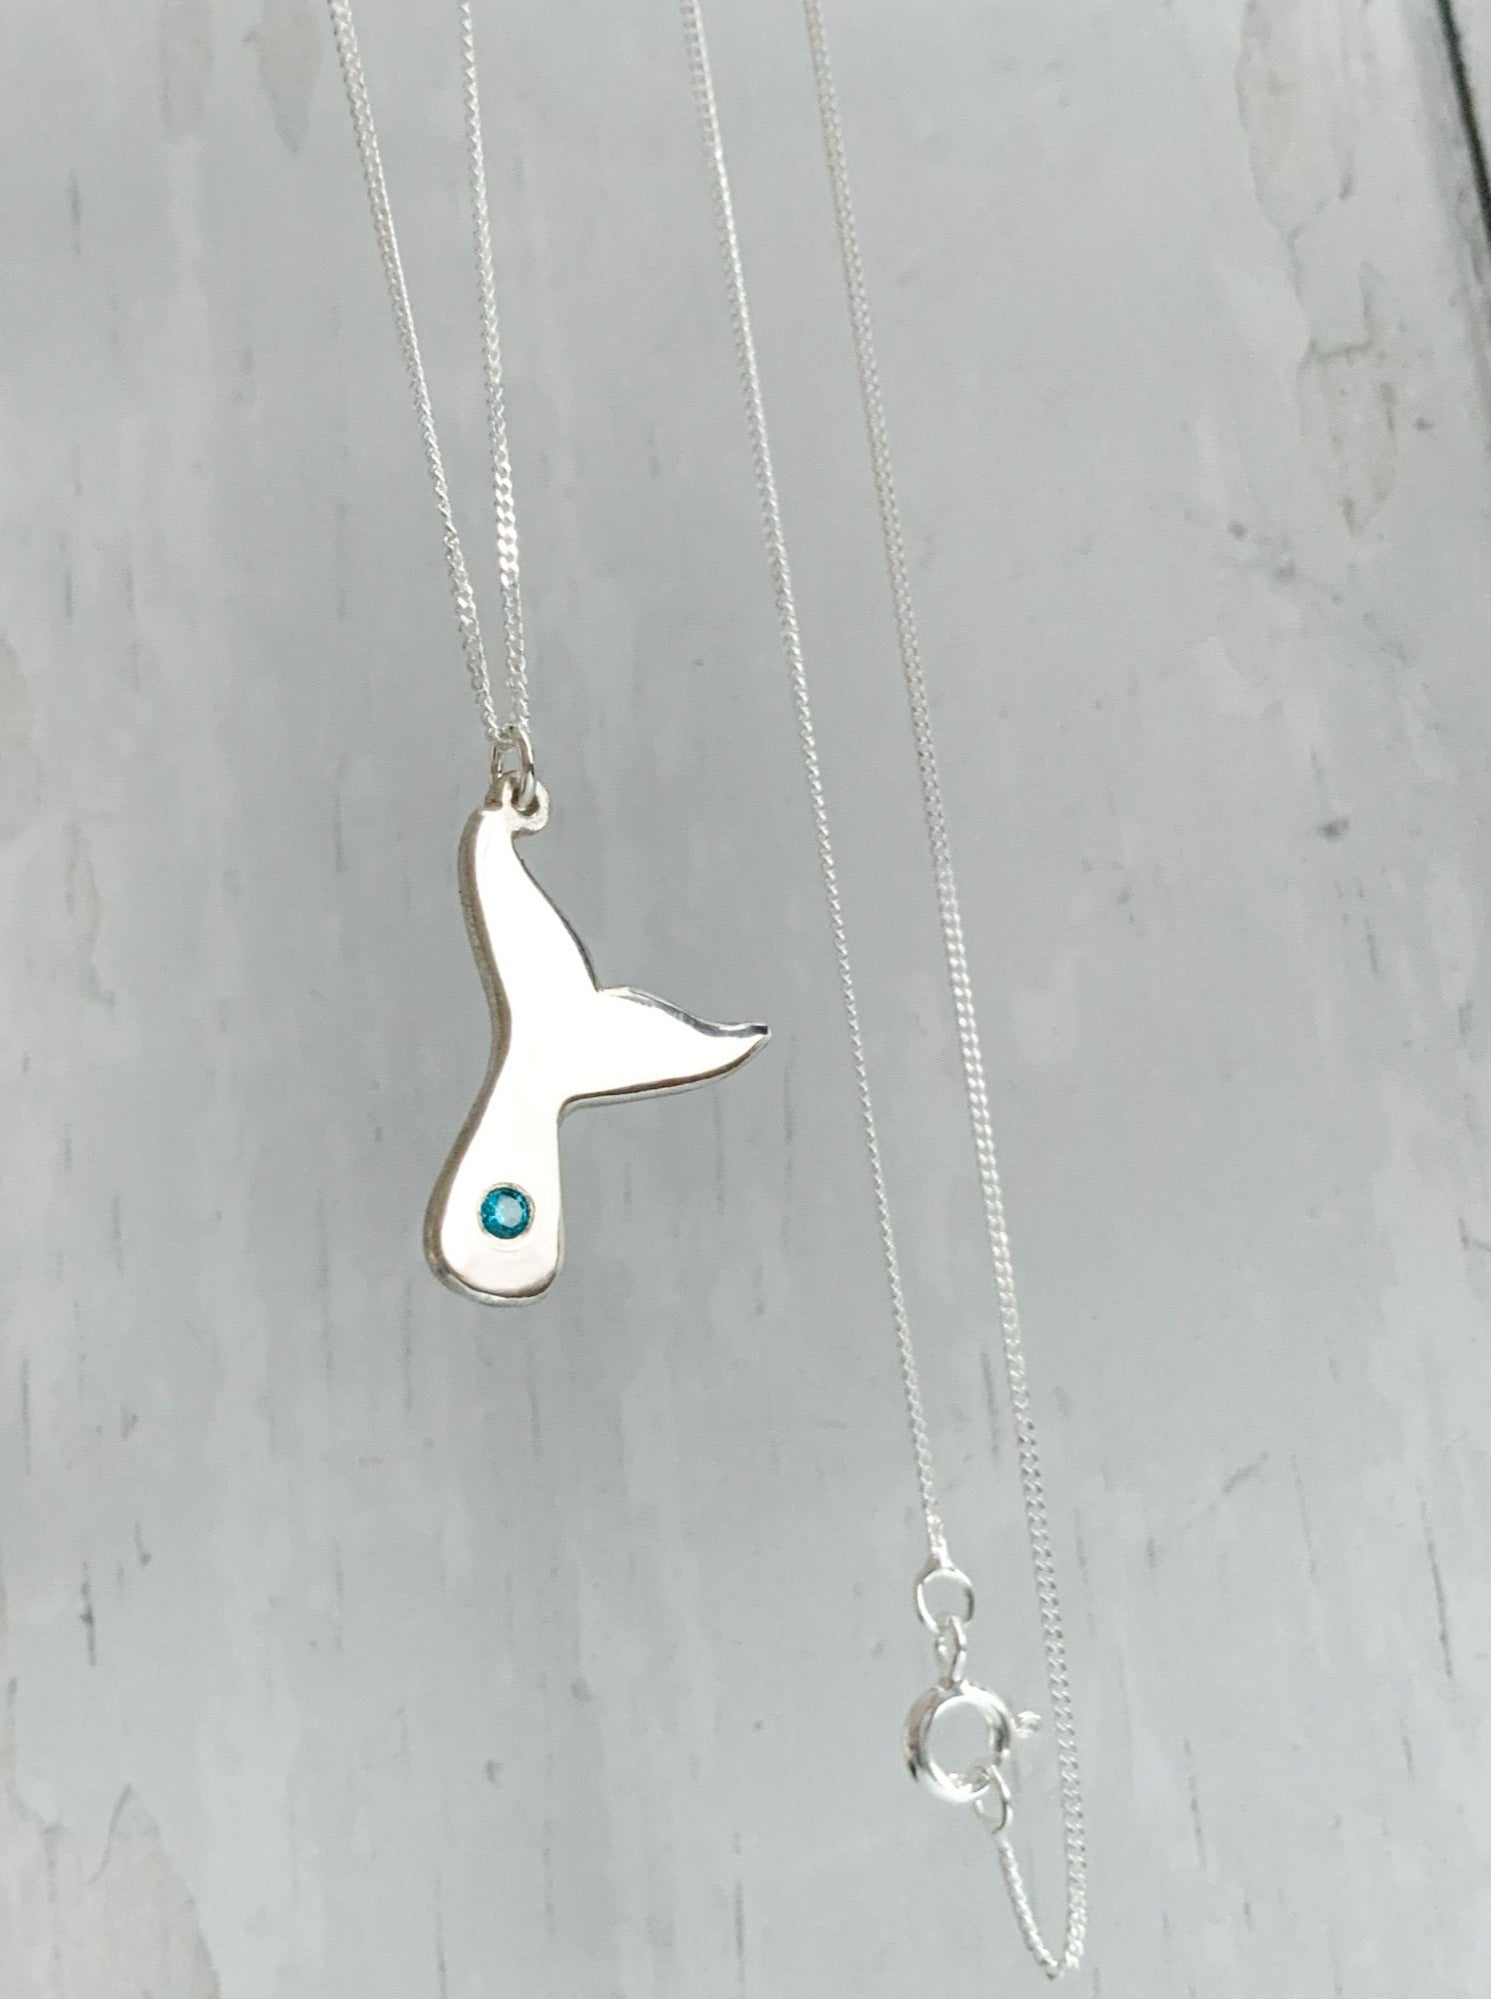 Solid silver whale tail necklace with flush set stone